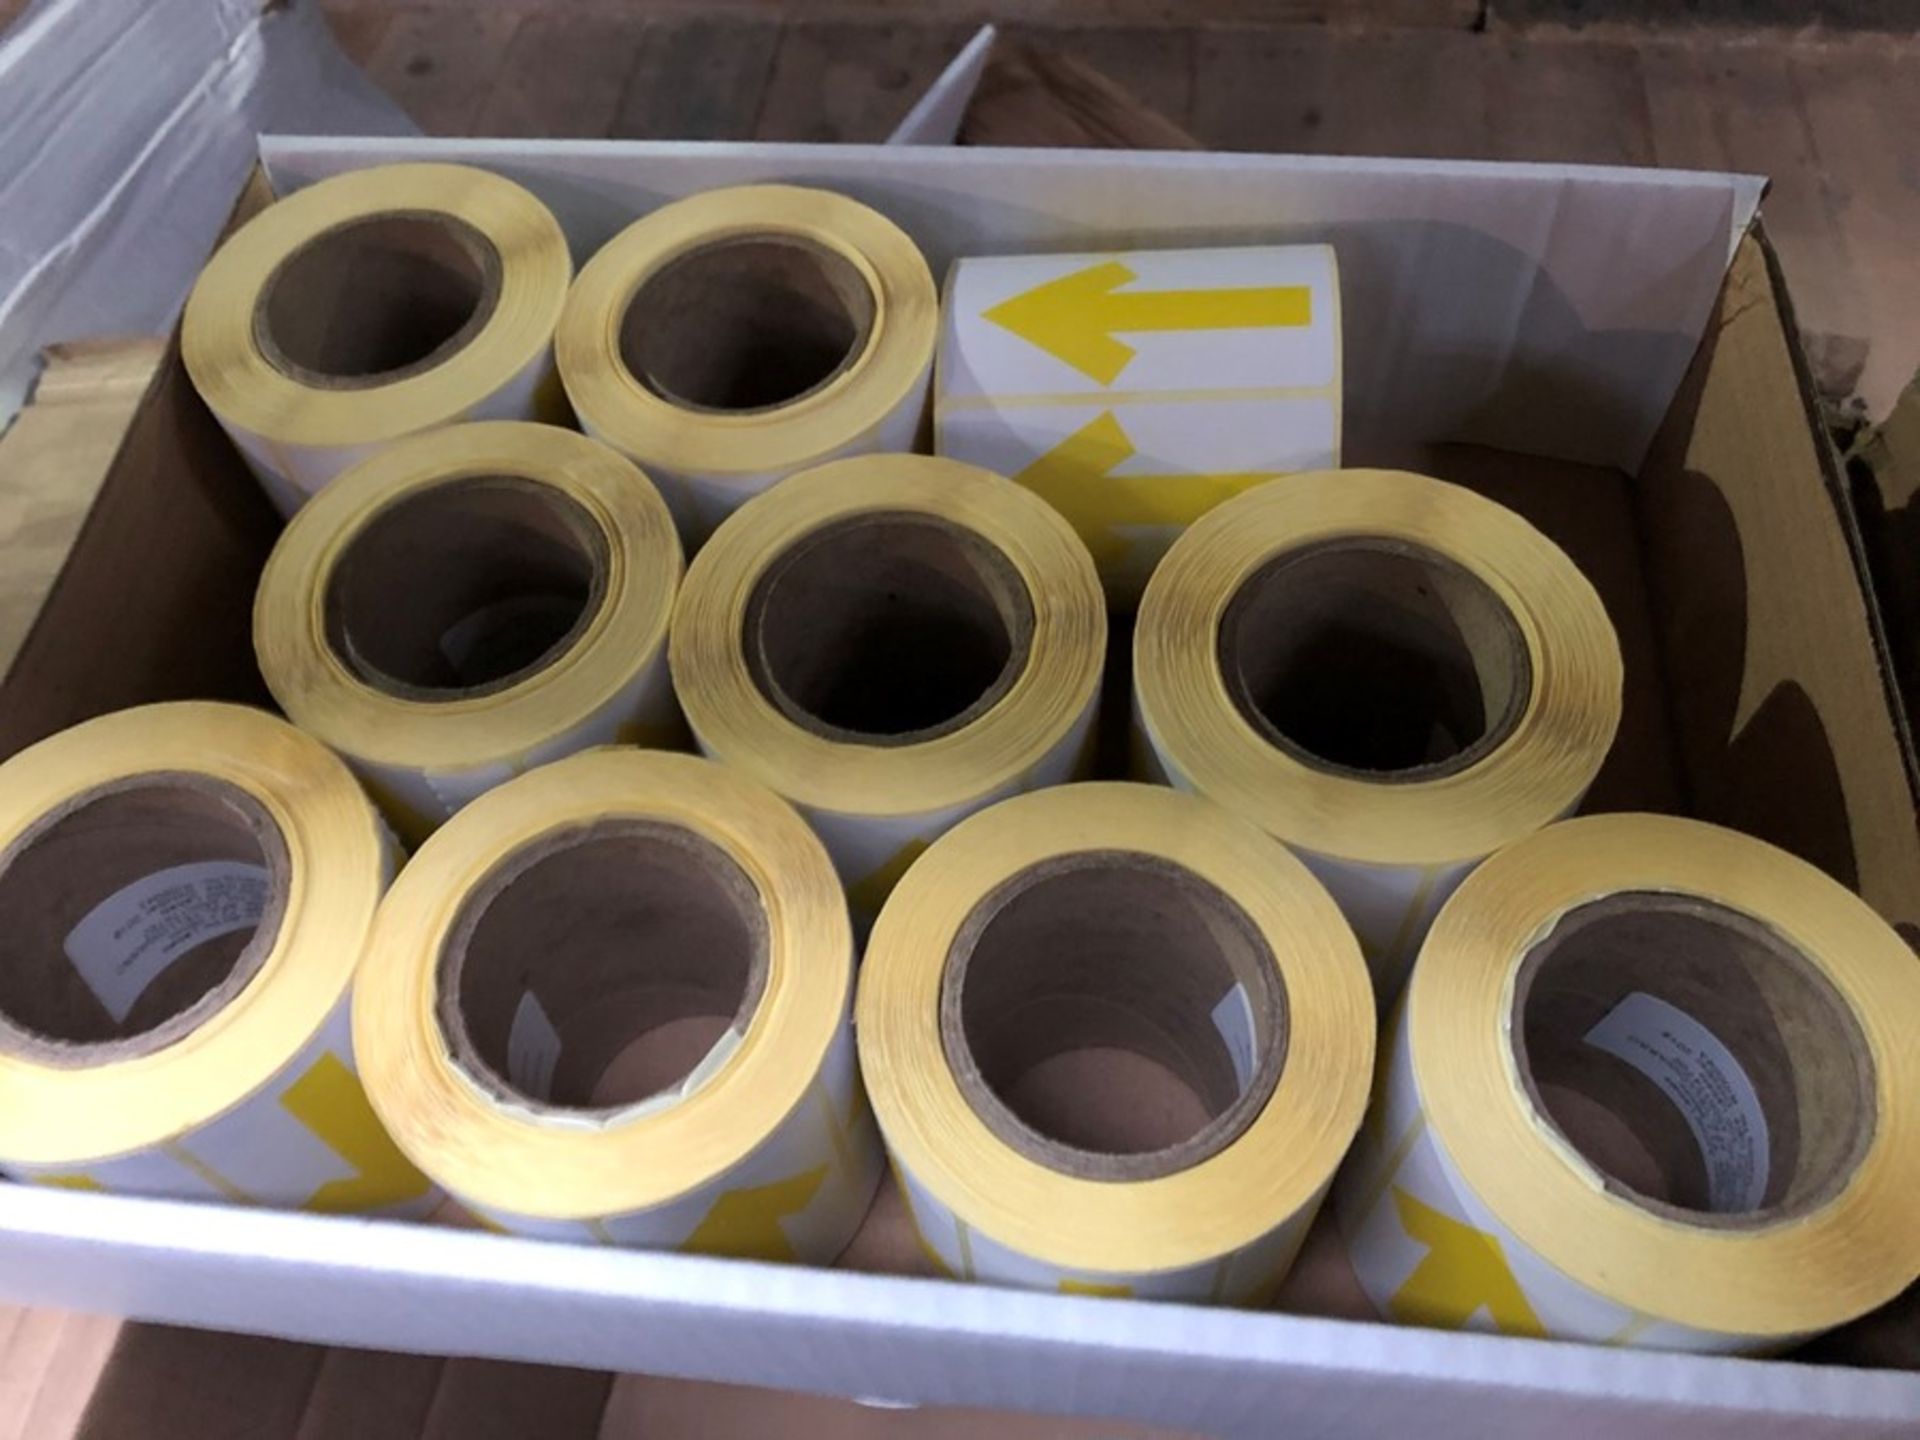 1 BOXED SET OF YELLOW ARROW STICKERS - 10 ROLLS OF STICKERS PER BOX (PUBLIC VIEWING AVAILABLE)